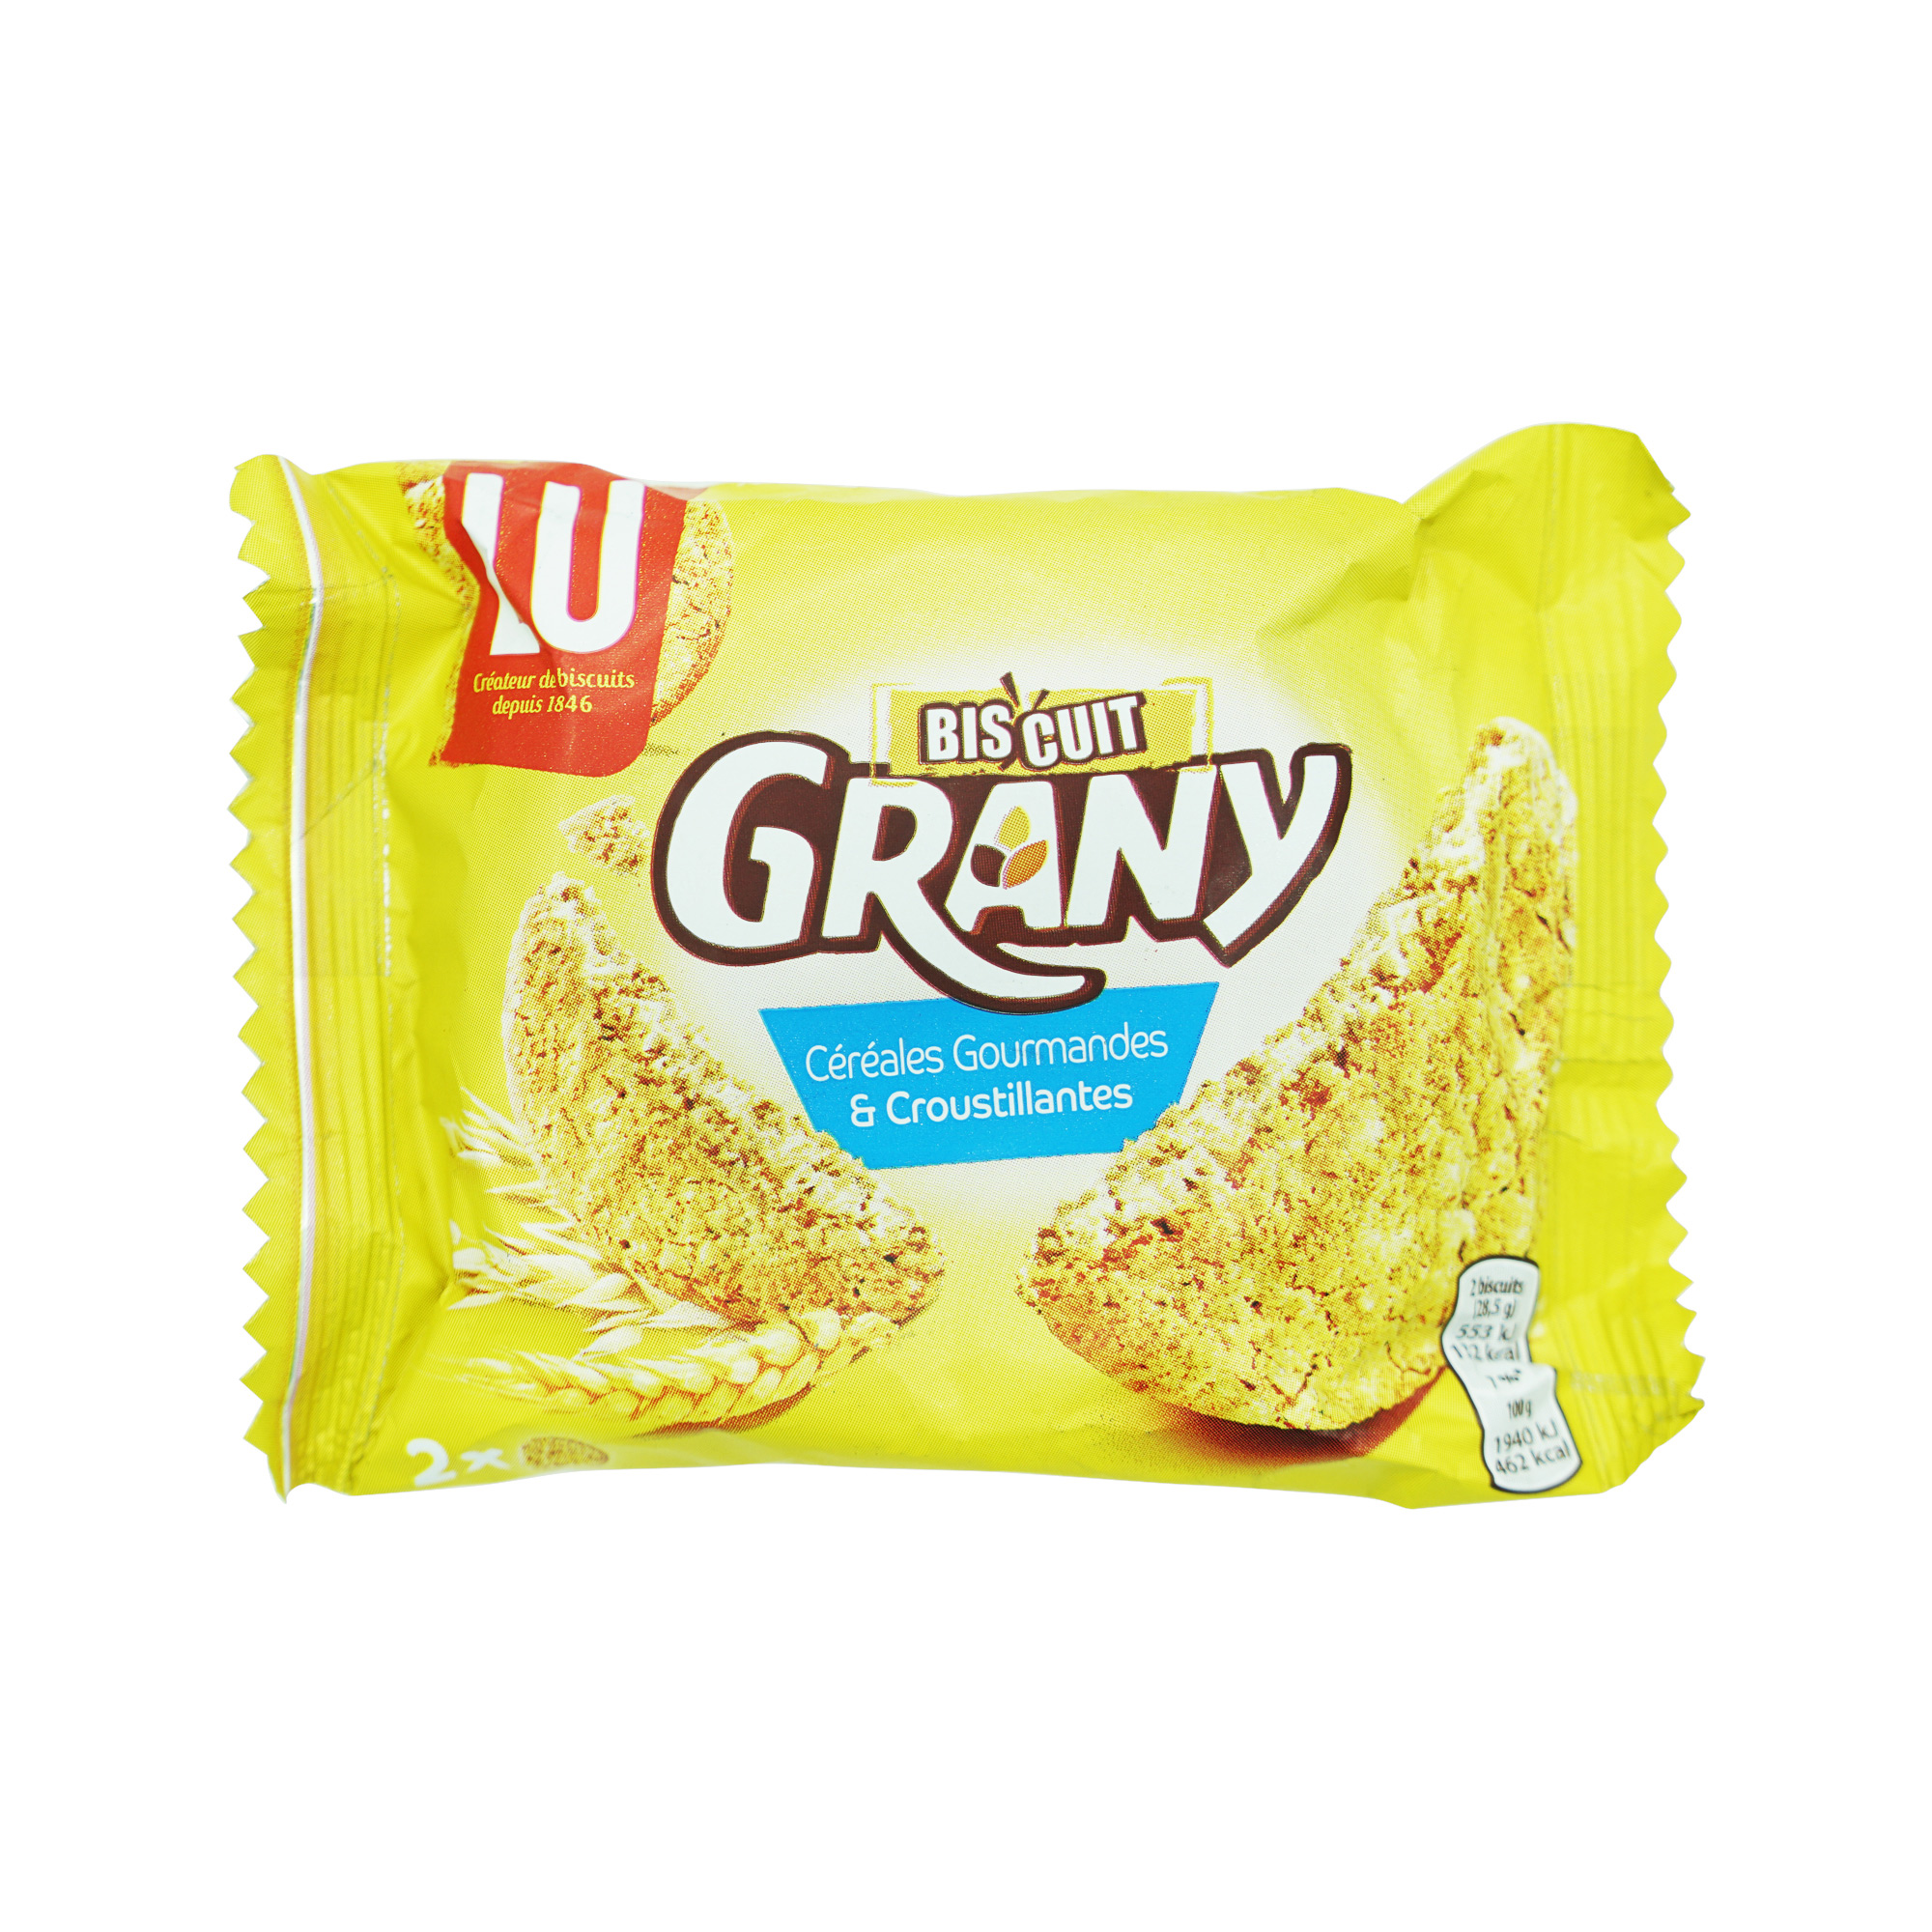 Grany Cereal Biscuit (28.5g)